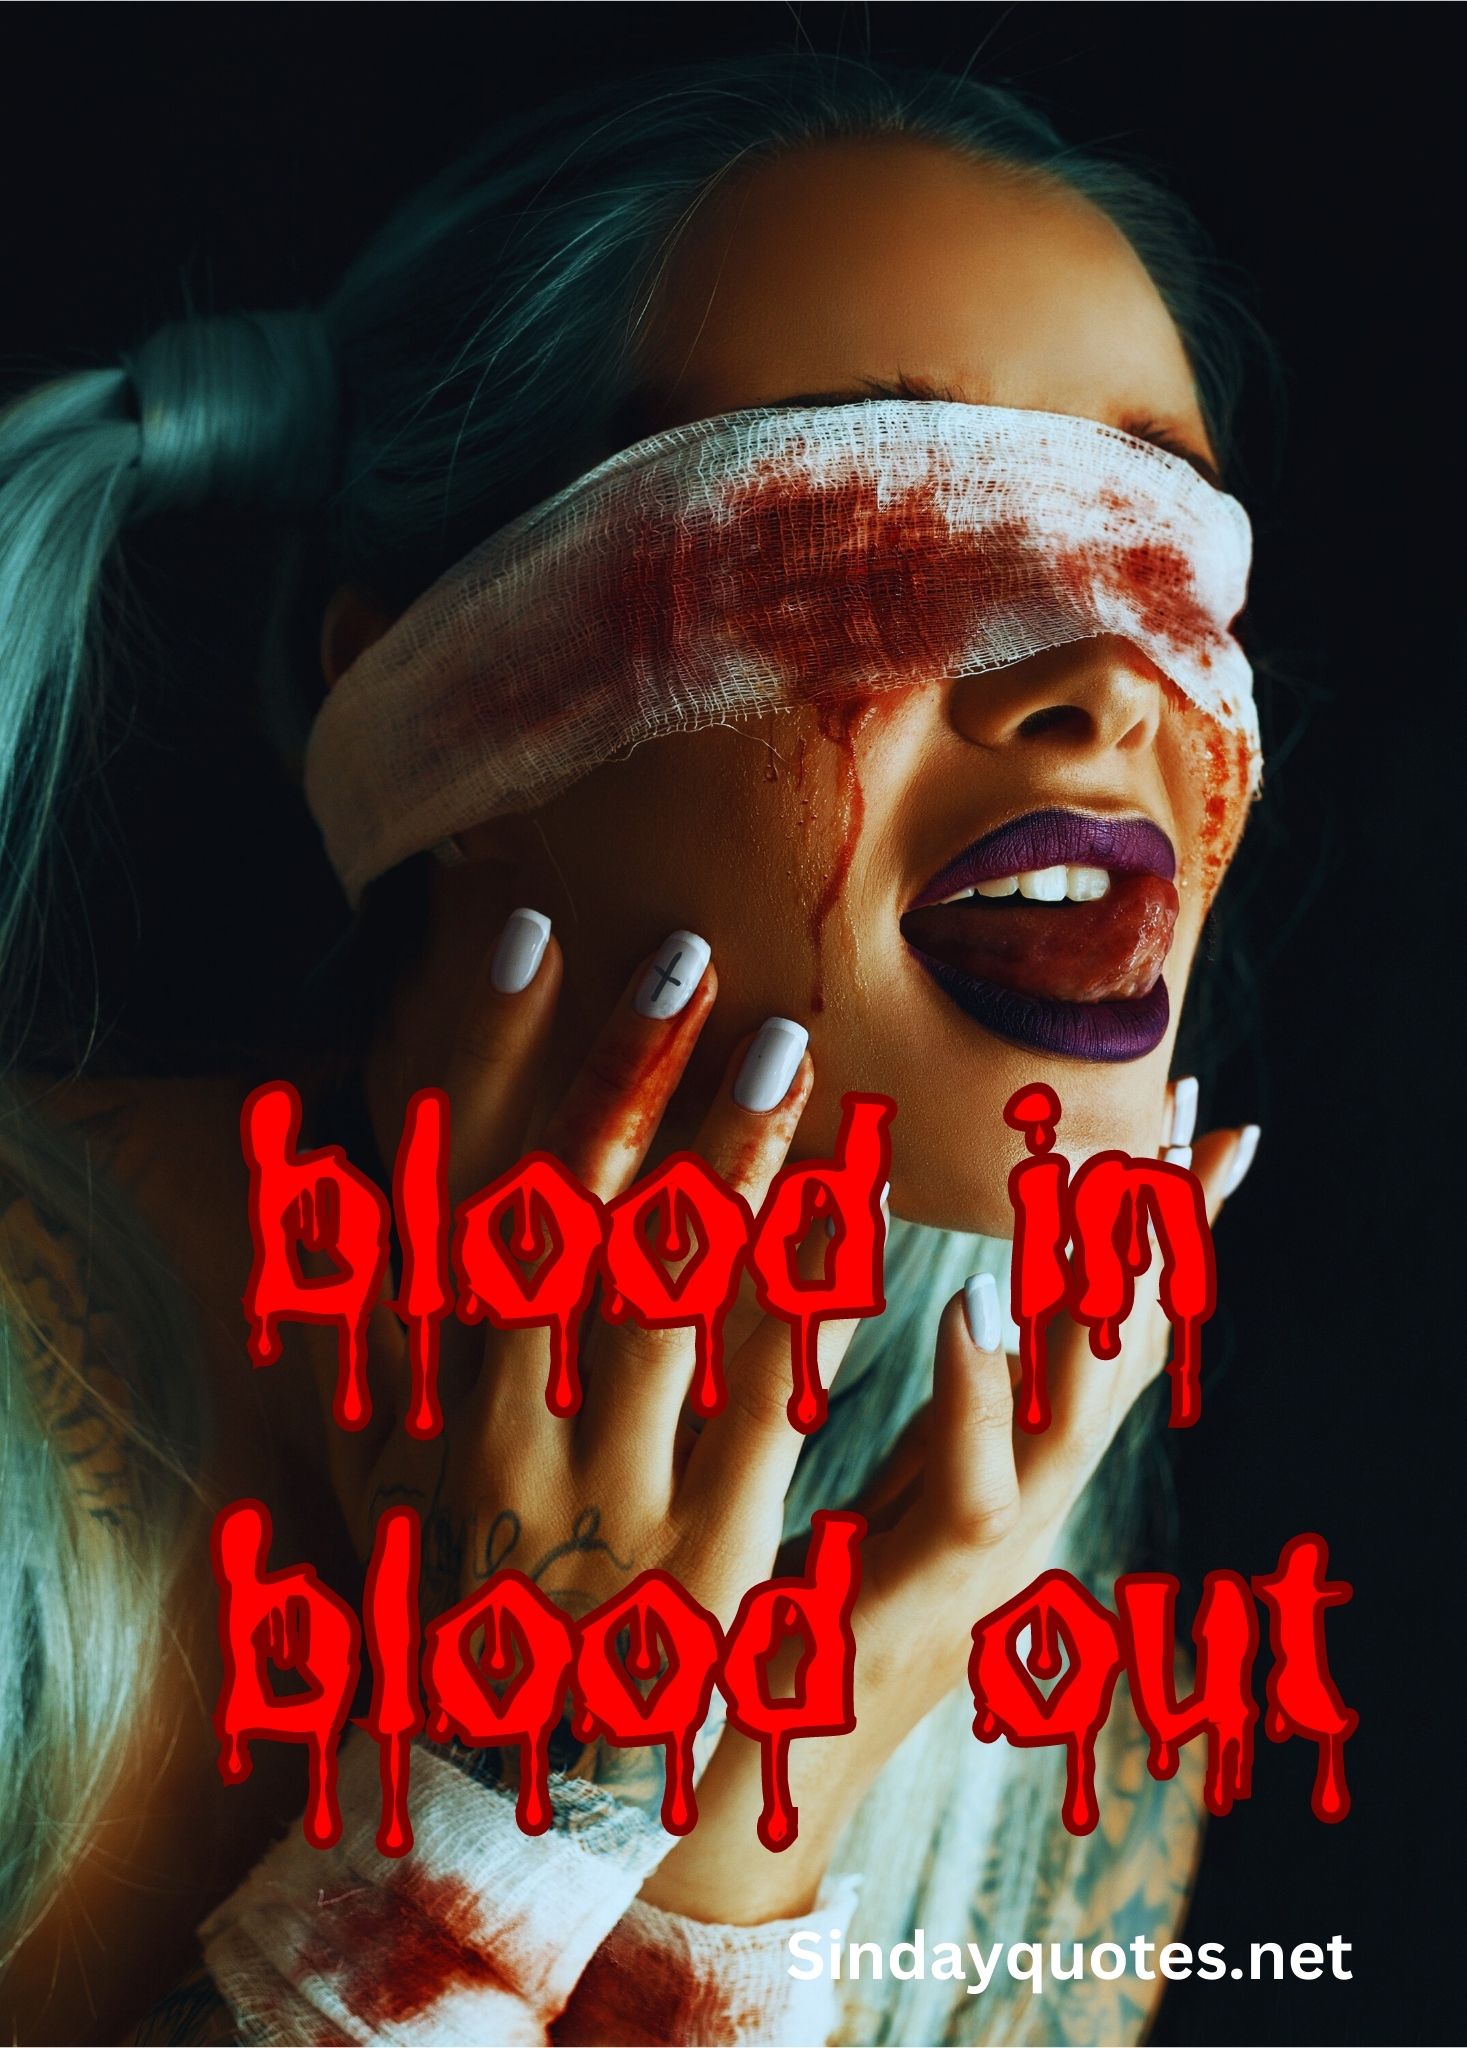 blood in blood out